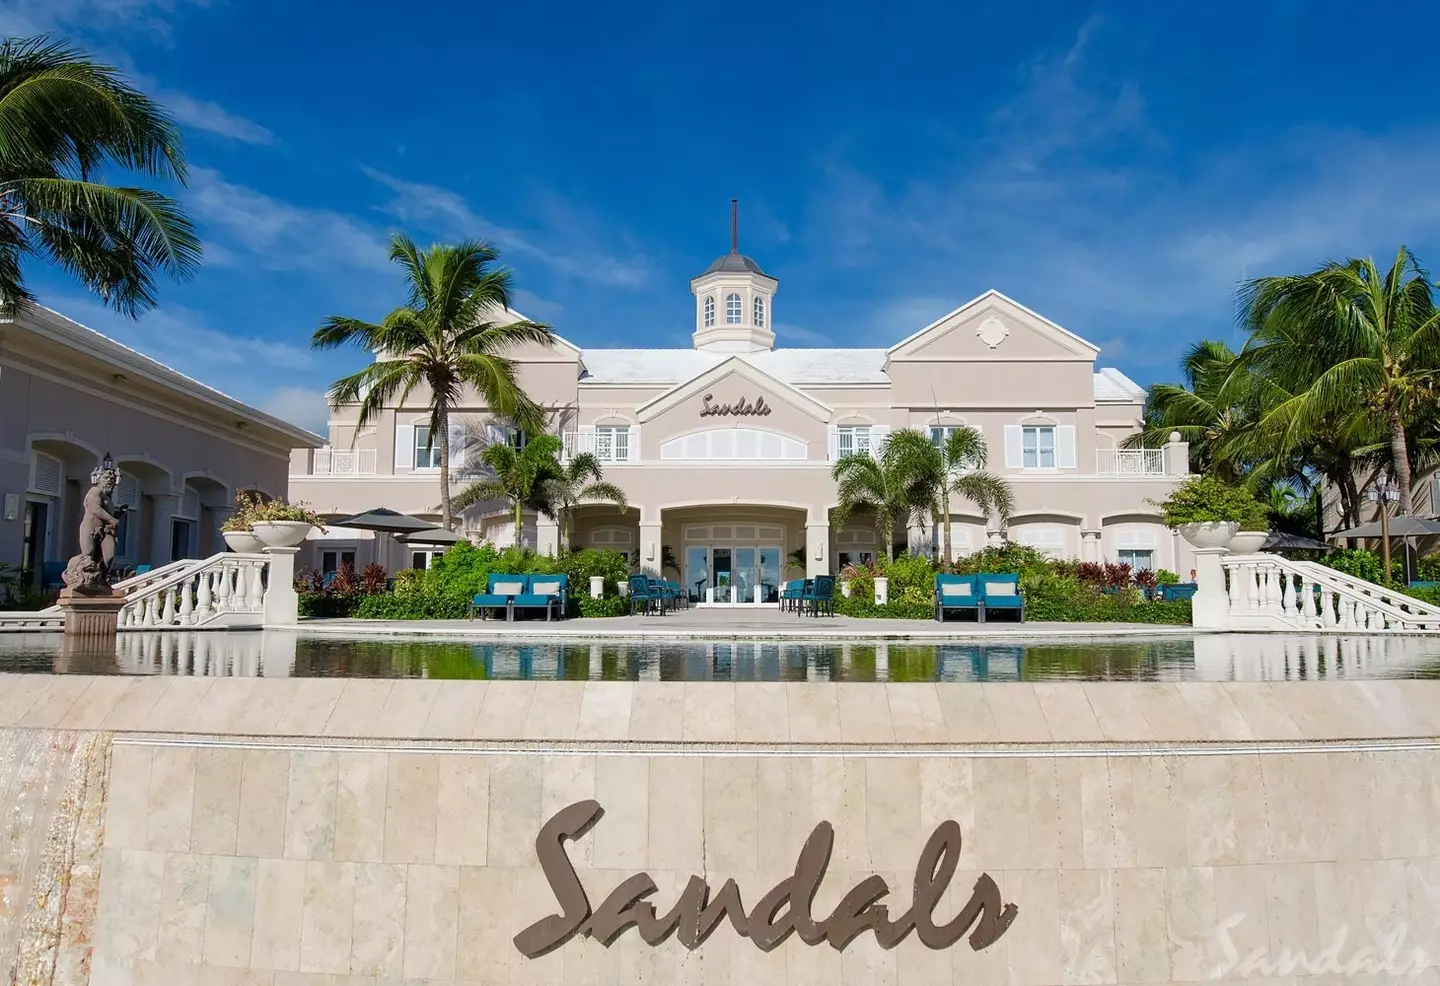 Three people have been found dead at the popular resort in the Bahamas.